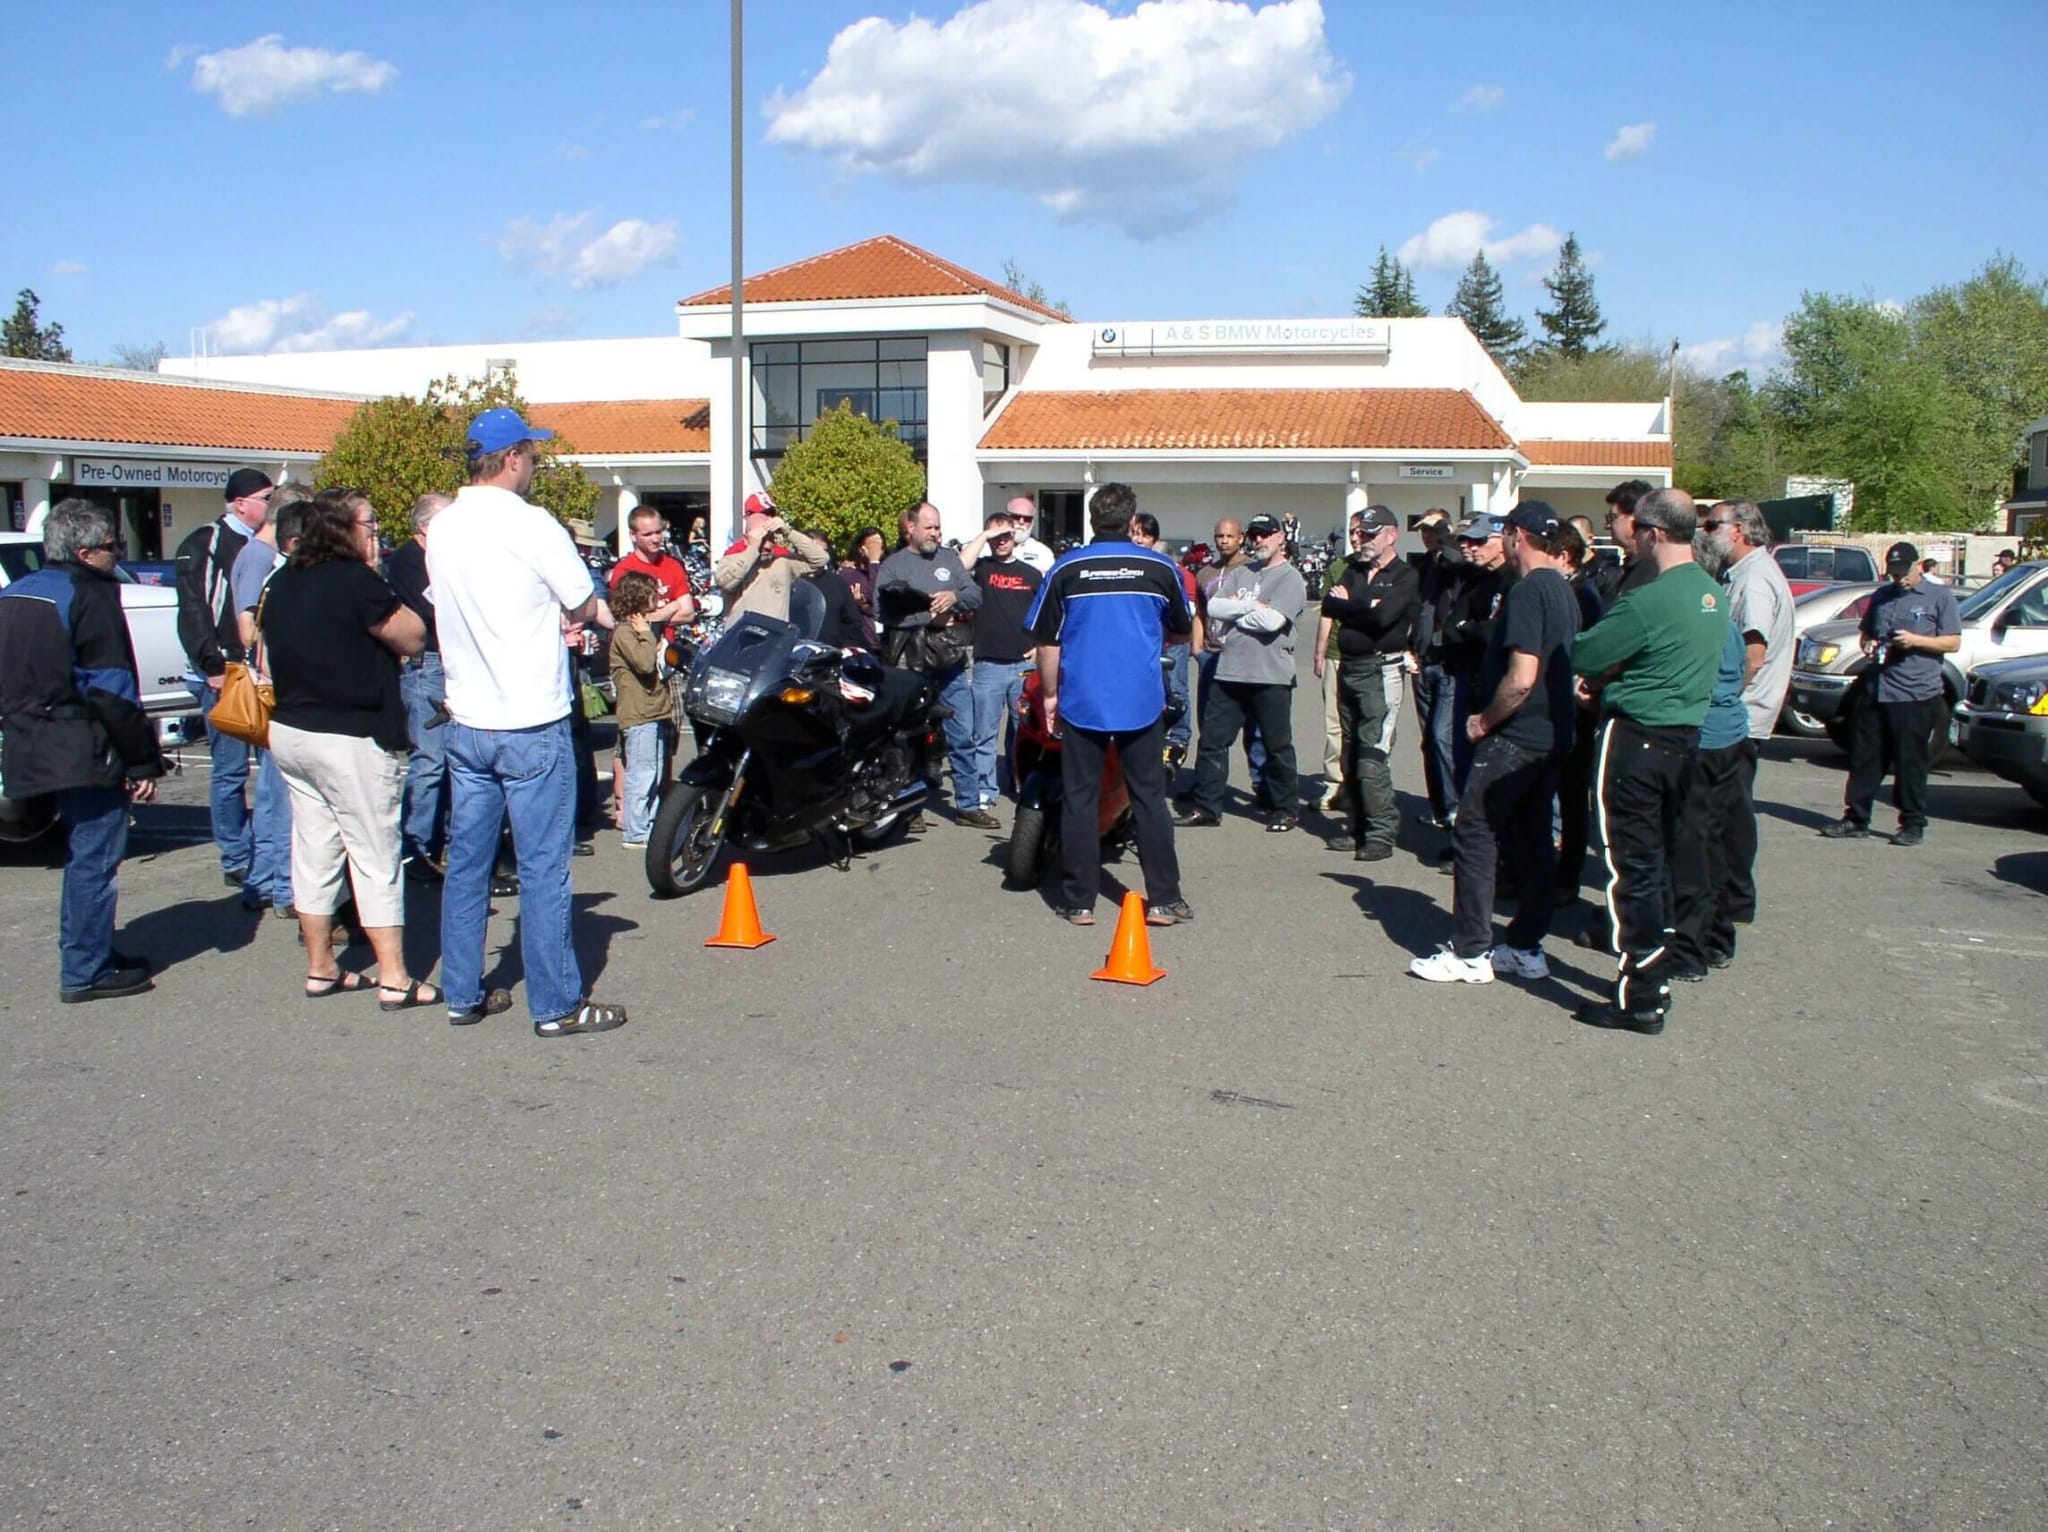 Coach Seminar on road hazards at A&S Powersports